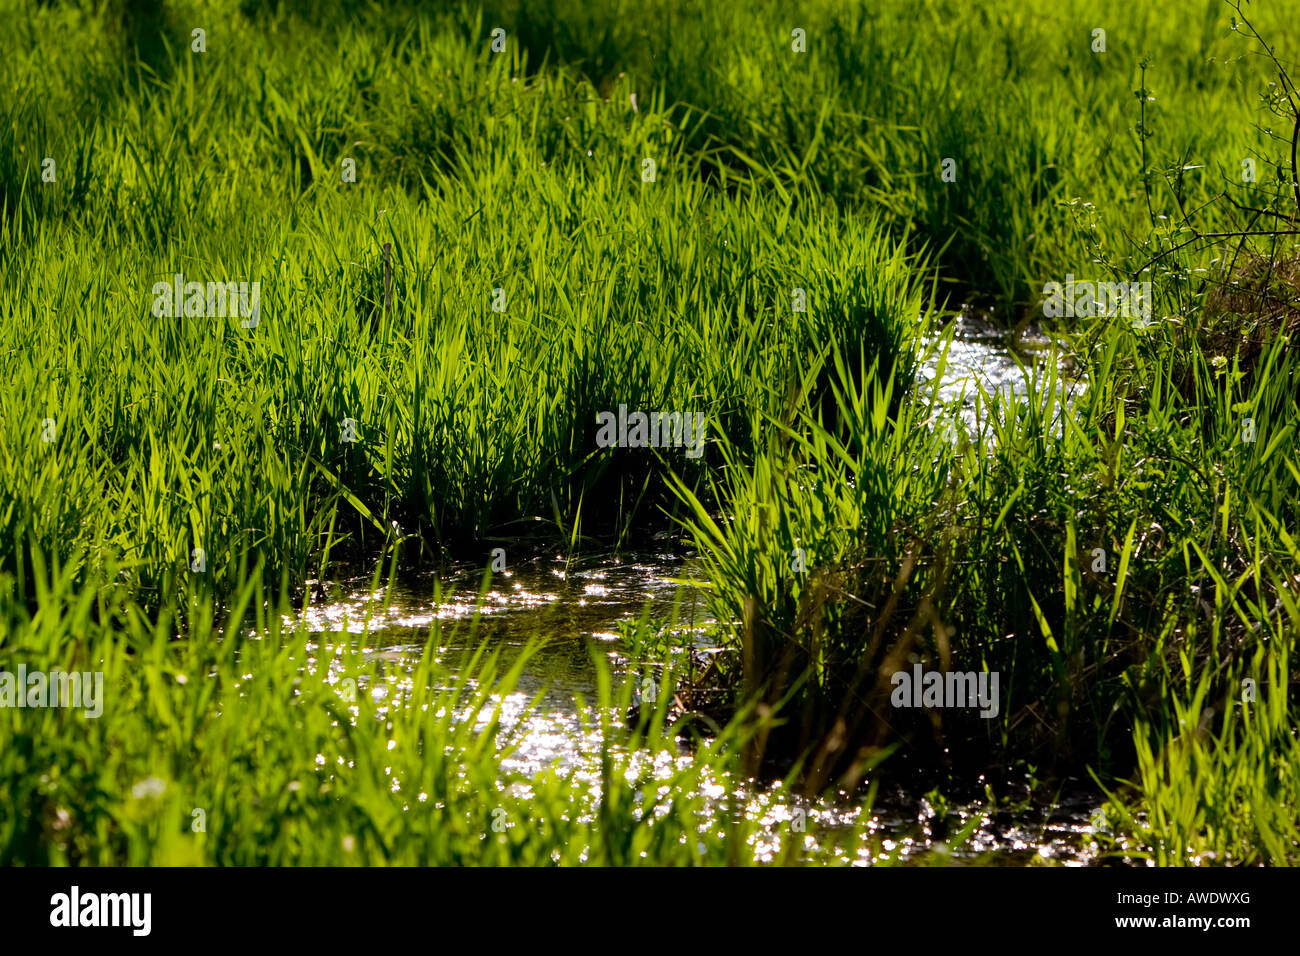 A small stream flows through a meadow in early spring. Stock Photo